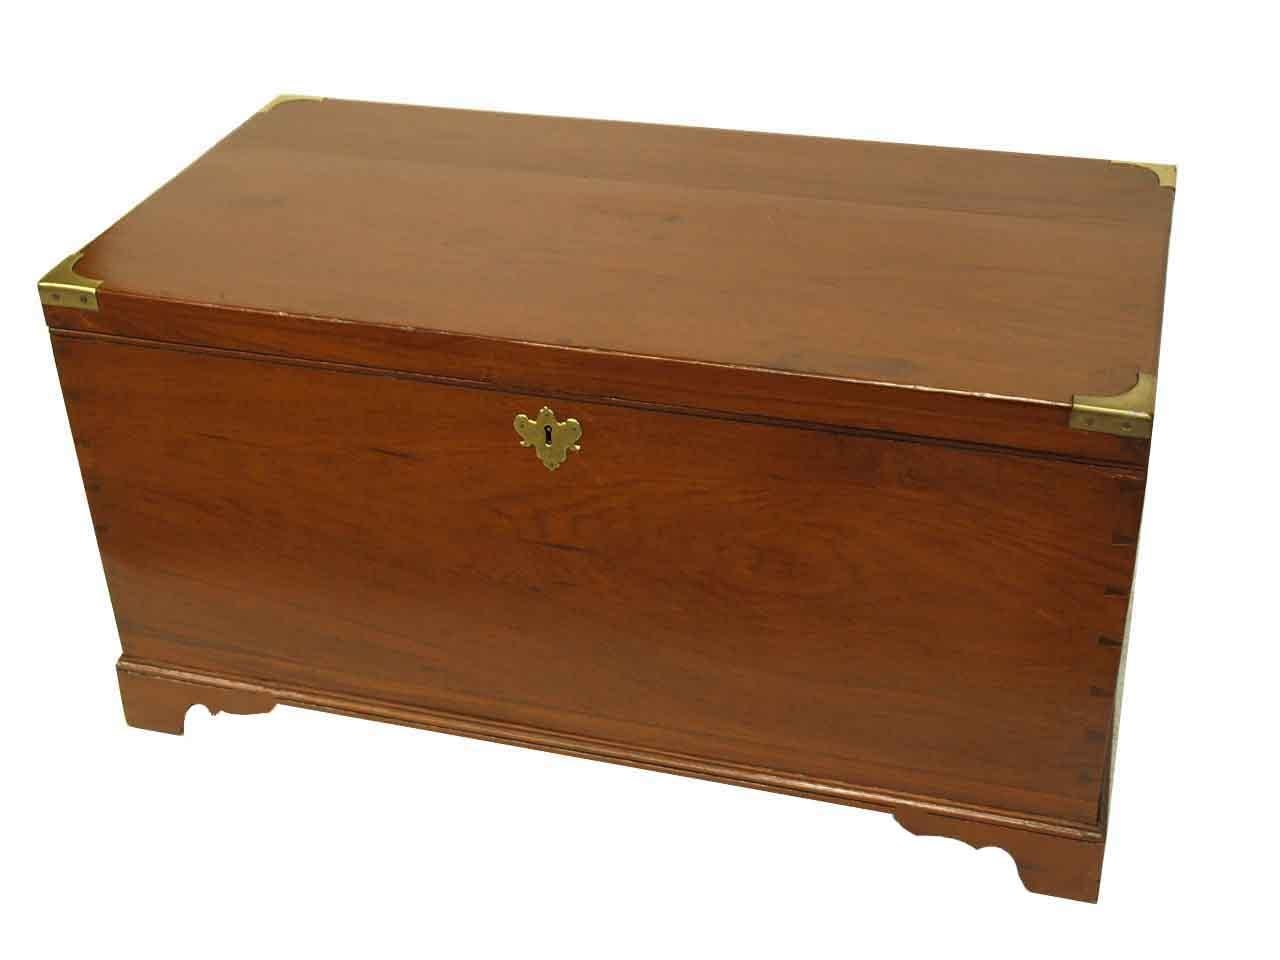 Mid-19th Century English Teak Wood Blanket Chest For Sale